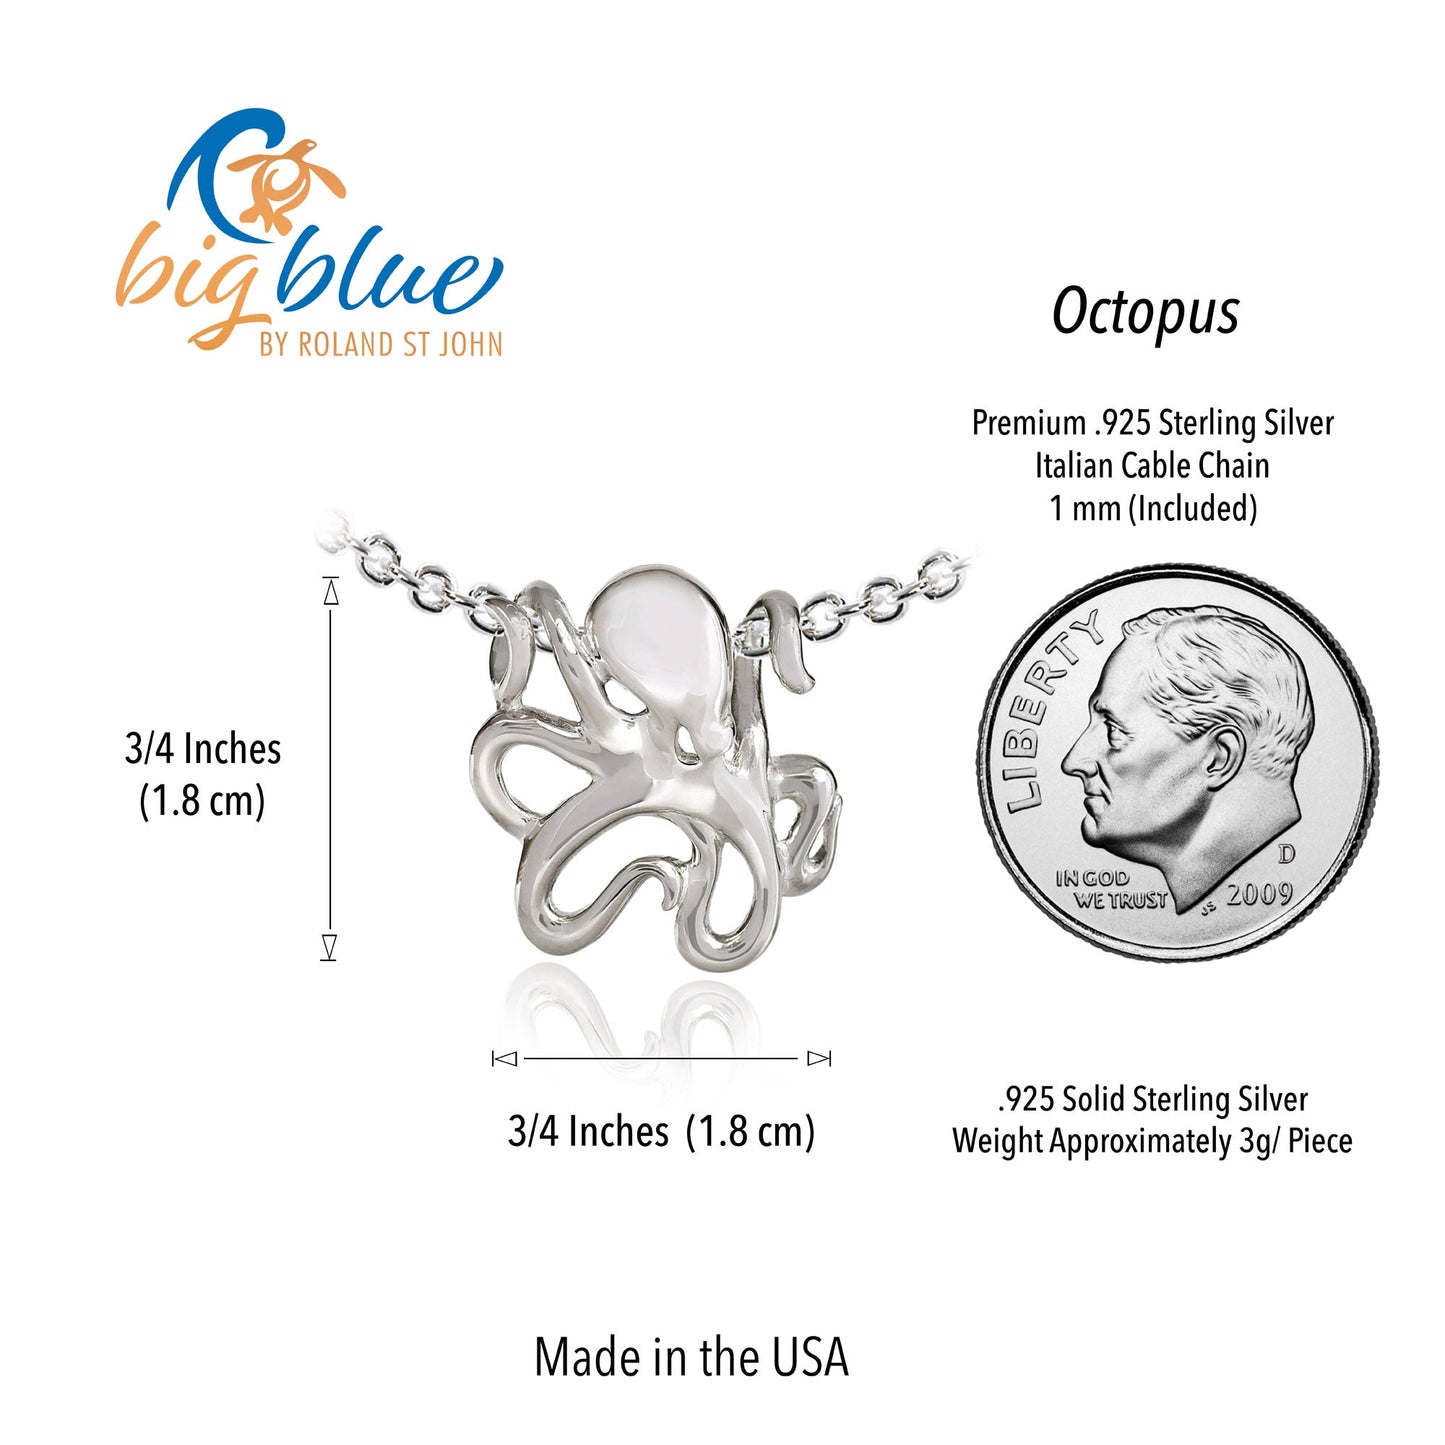 Miniature Octopus Necklaces for Women Sterling Silver- Octopus Jewelry for Women, Sea Life Jewelry, Octopus Gifts - The Tool Store